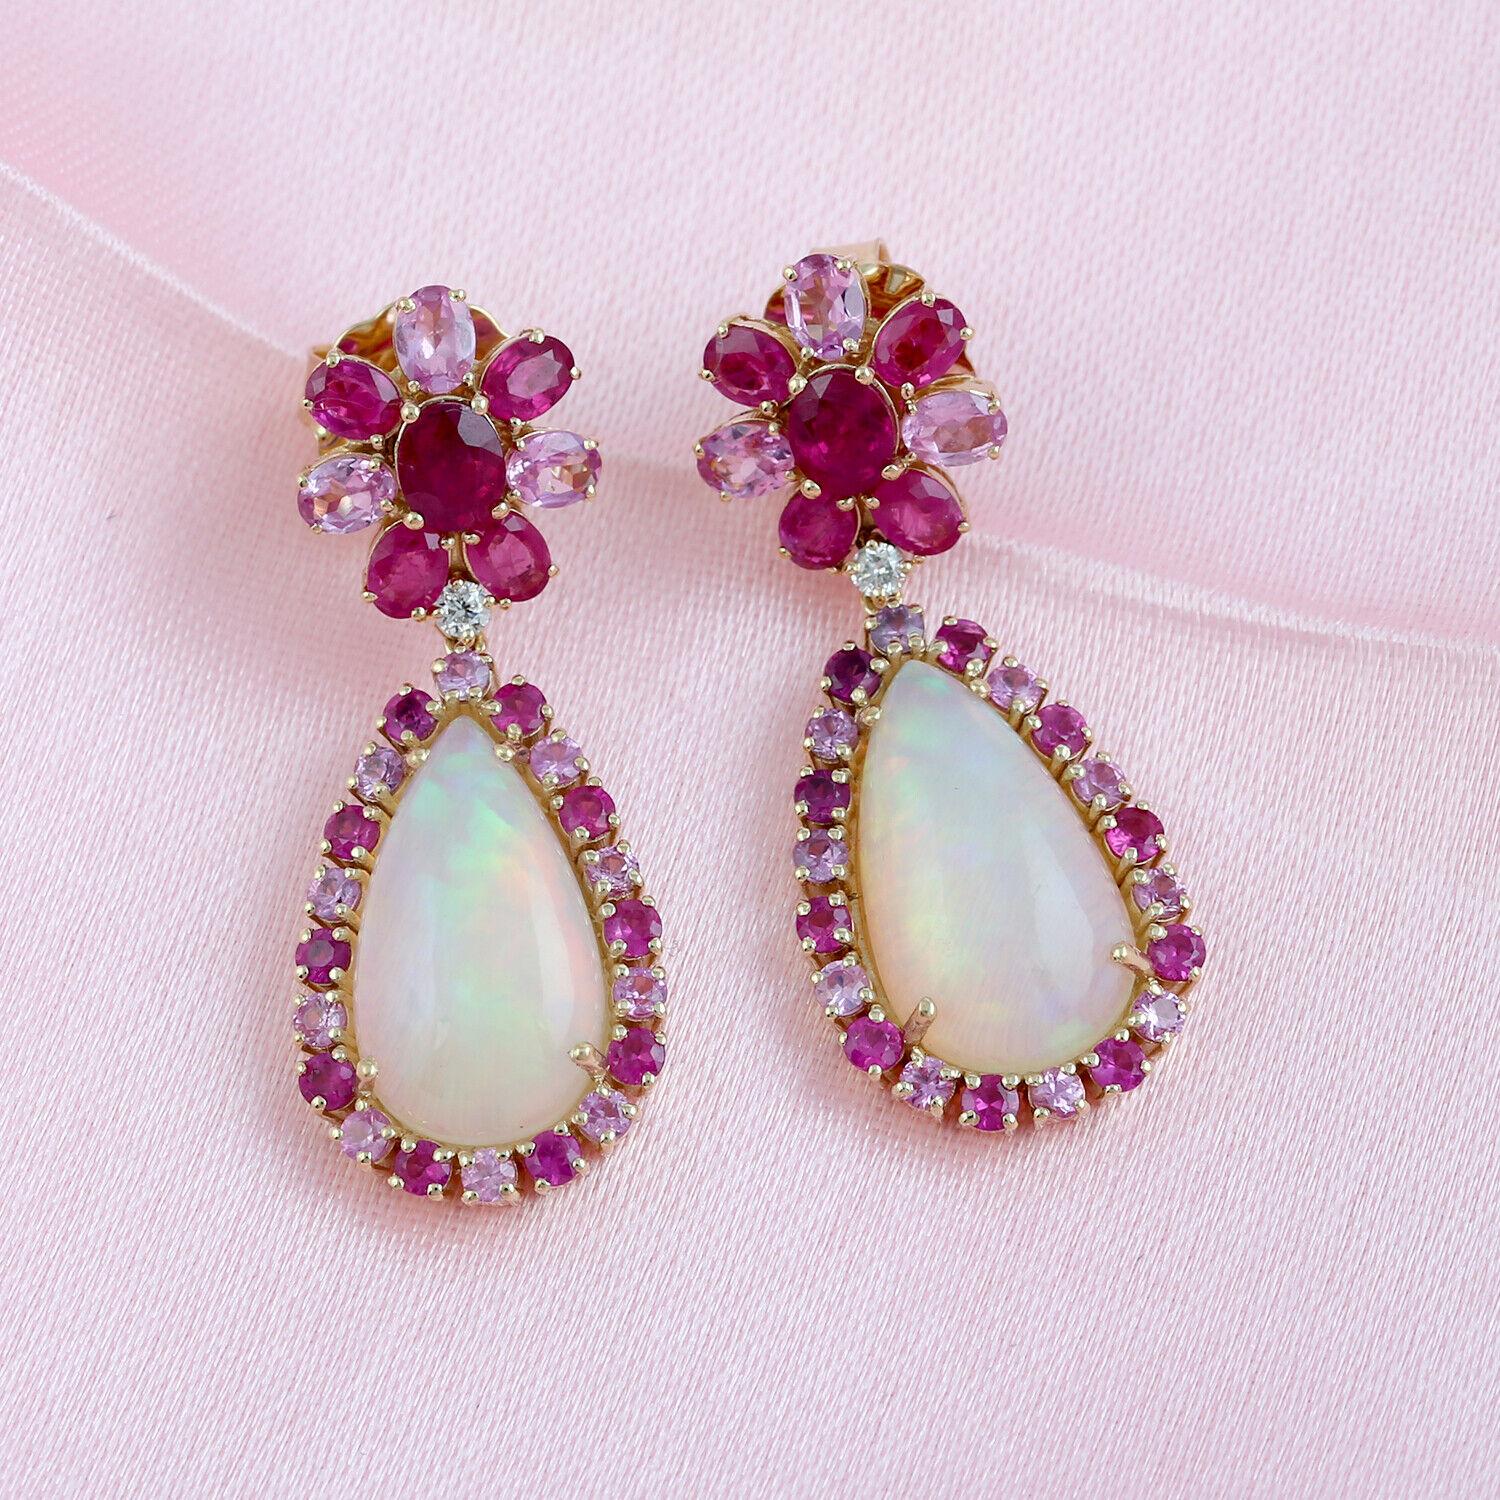 Cast in 14 karat gold. These earrings are handset in 13.51 carats Ethiopian opal, ruby, sapphire and .09 carats of sparkling diamonds. 

FOLLOW MEGHNA JEWELS storefront to view the latest collection & exclusive pieces. Meghna Jewels is proudly rated